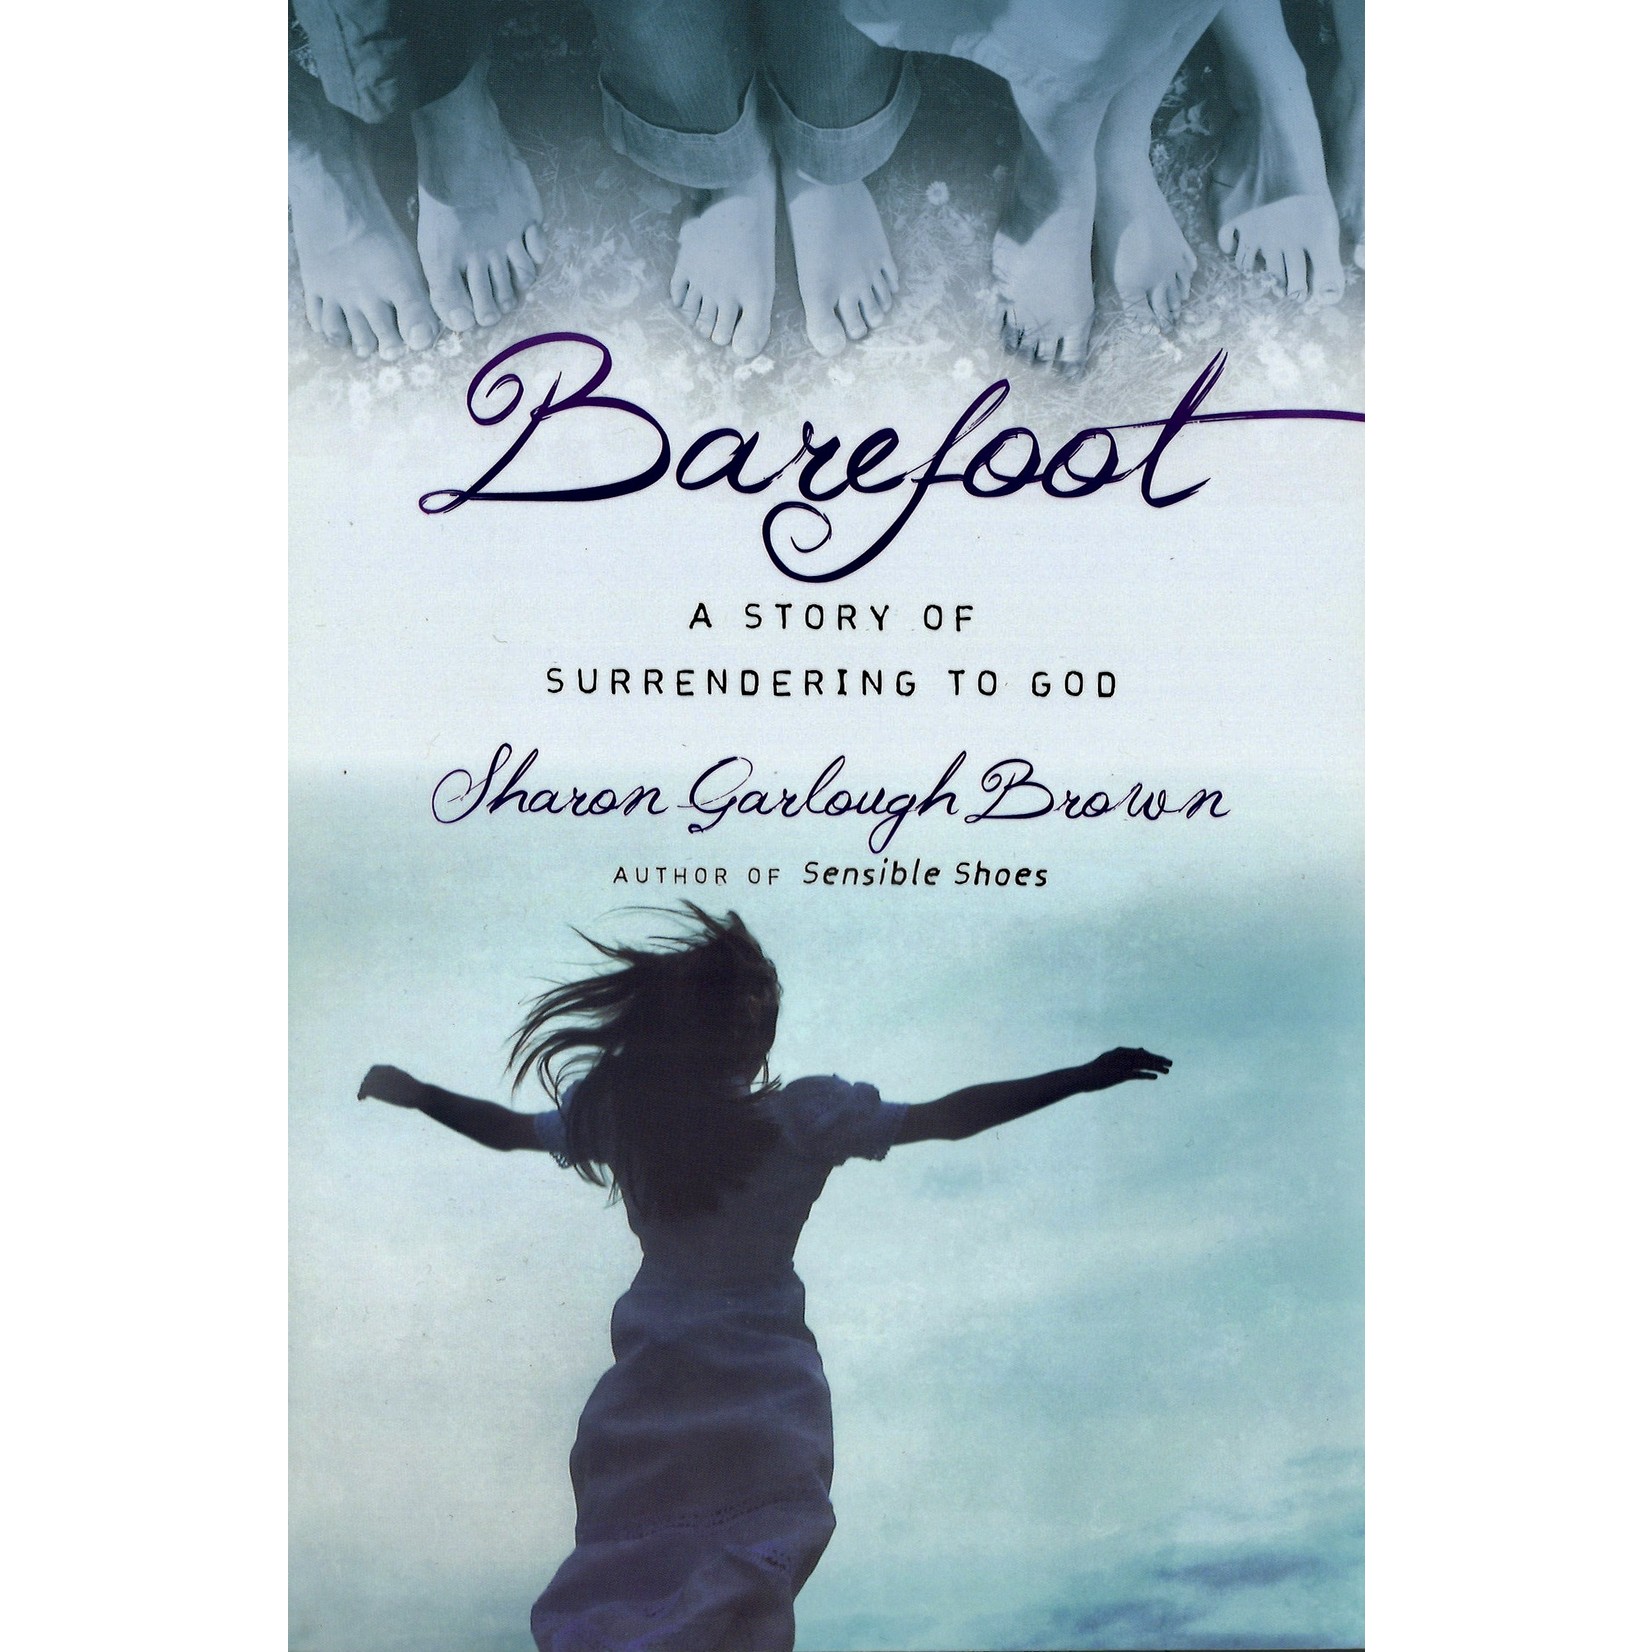 BAREFOOT: A STORY OF SURRENDERING TO GOD